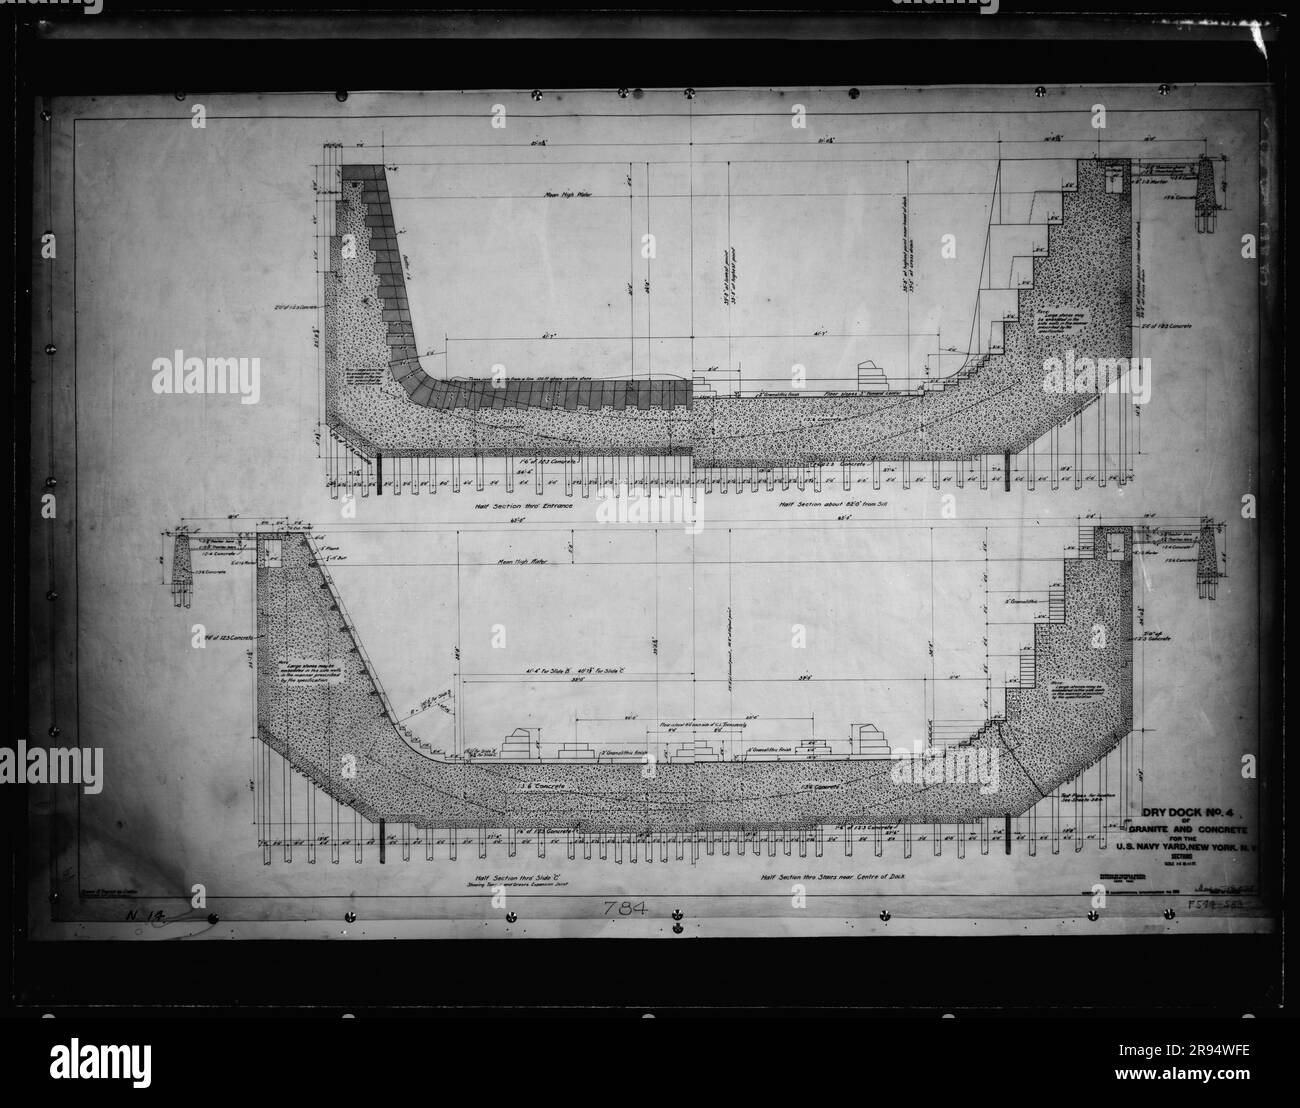 Drawing: Dry Dock Number 4 Granite and Concrete for the US Navy Yard, New York, New York. Glass Plate Negatives of the Construction and Repair of Buildings, Facilities, and Vessels at the New York Navy Yard. Stock Photo